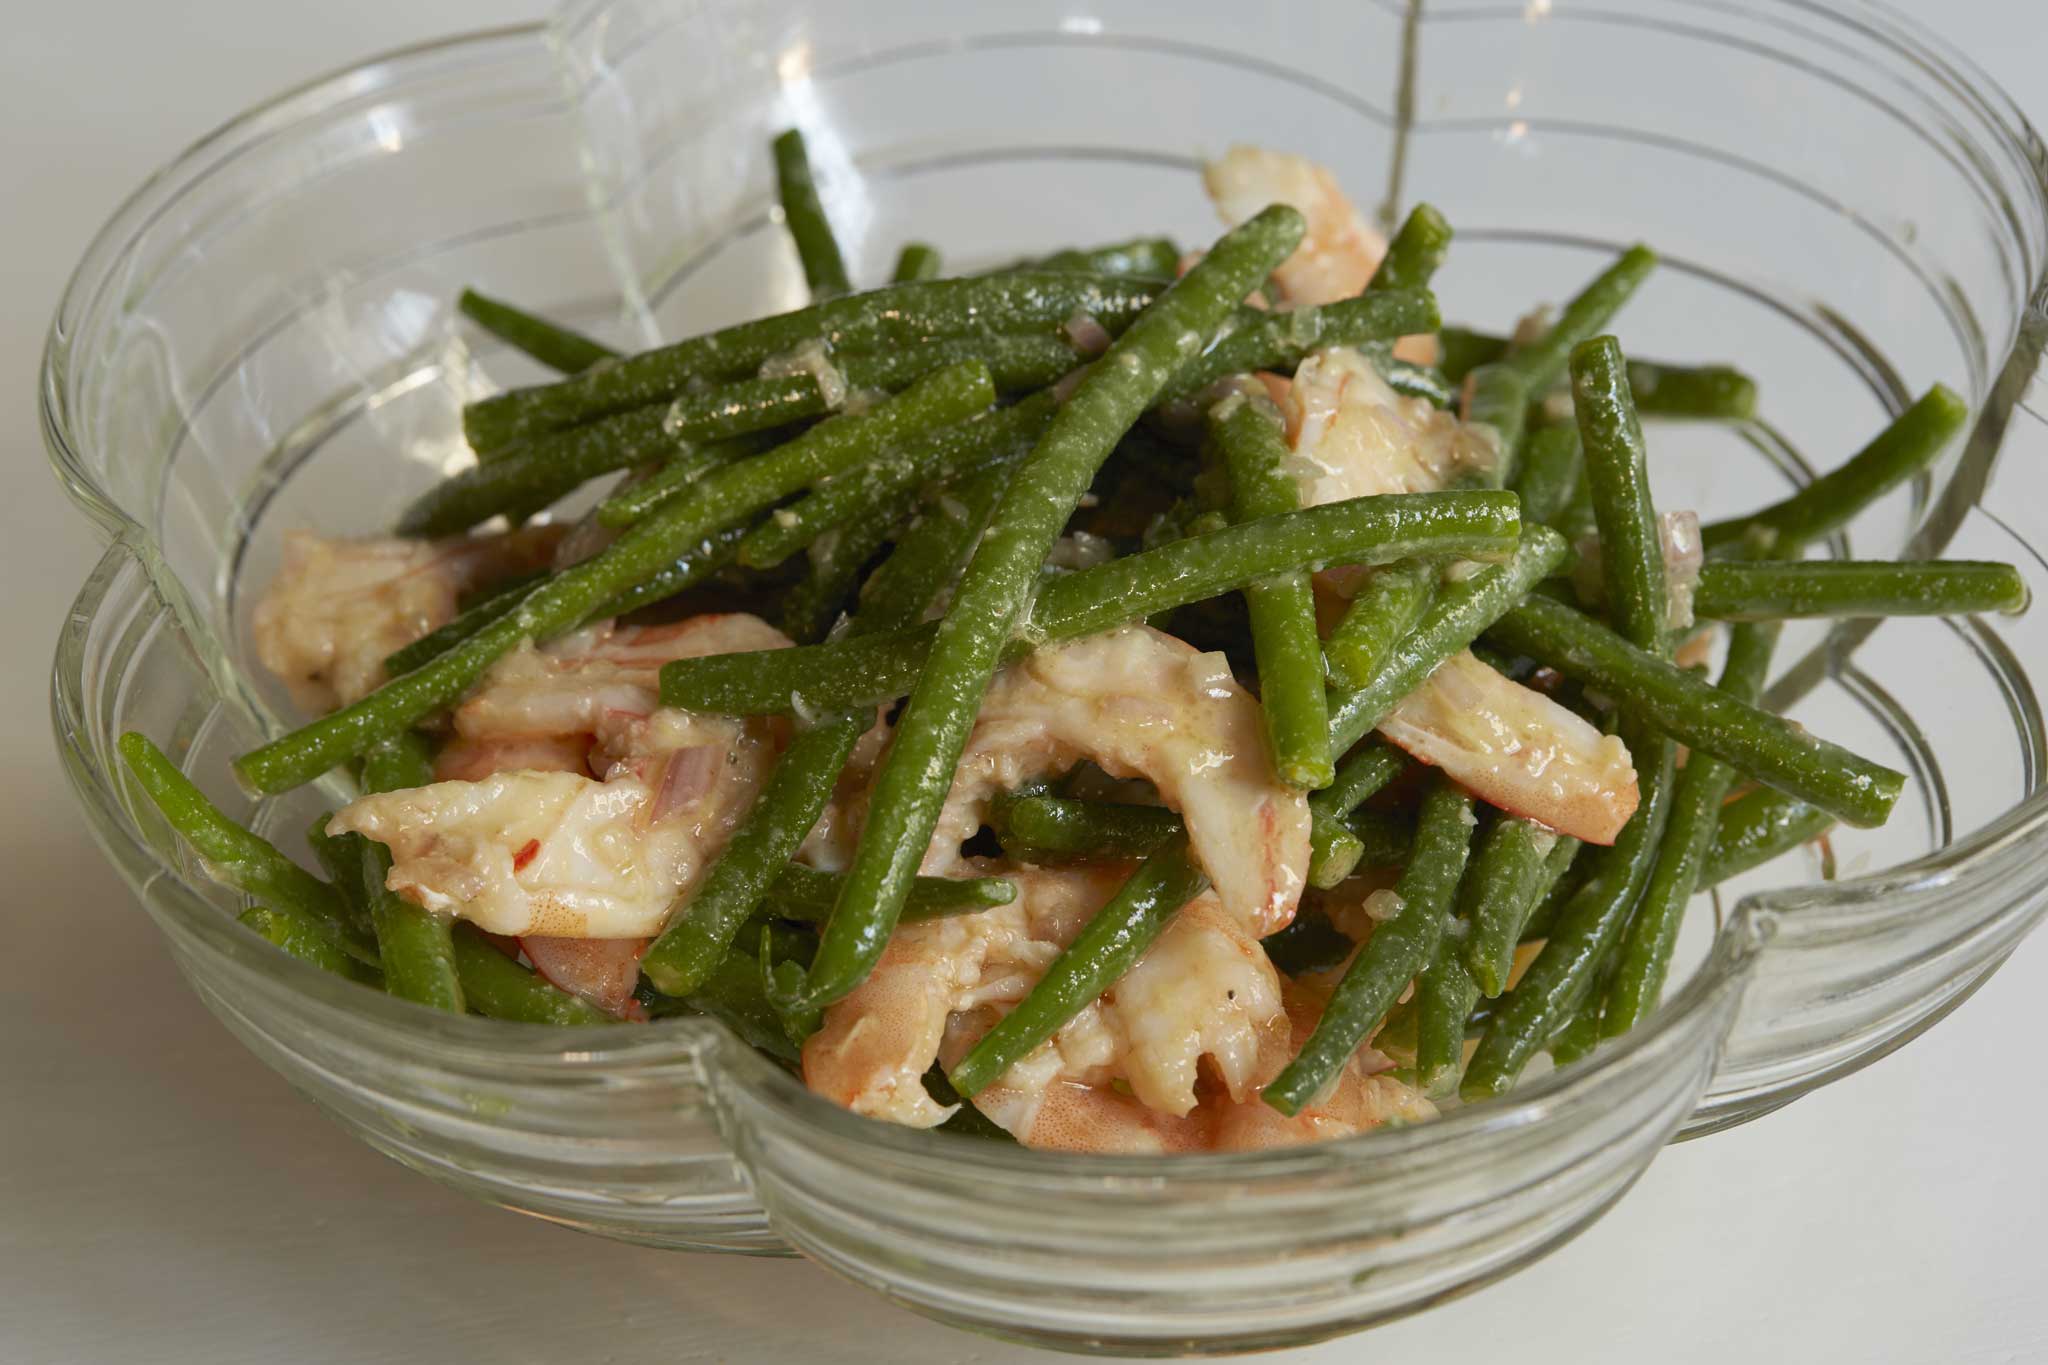 Prawn and green bean salad is a dead-simple salad to prepare